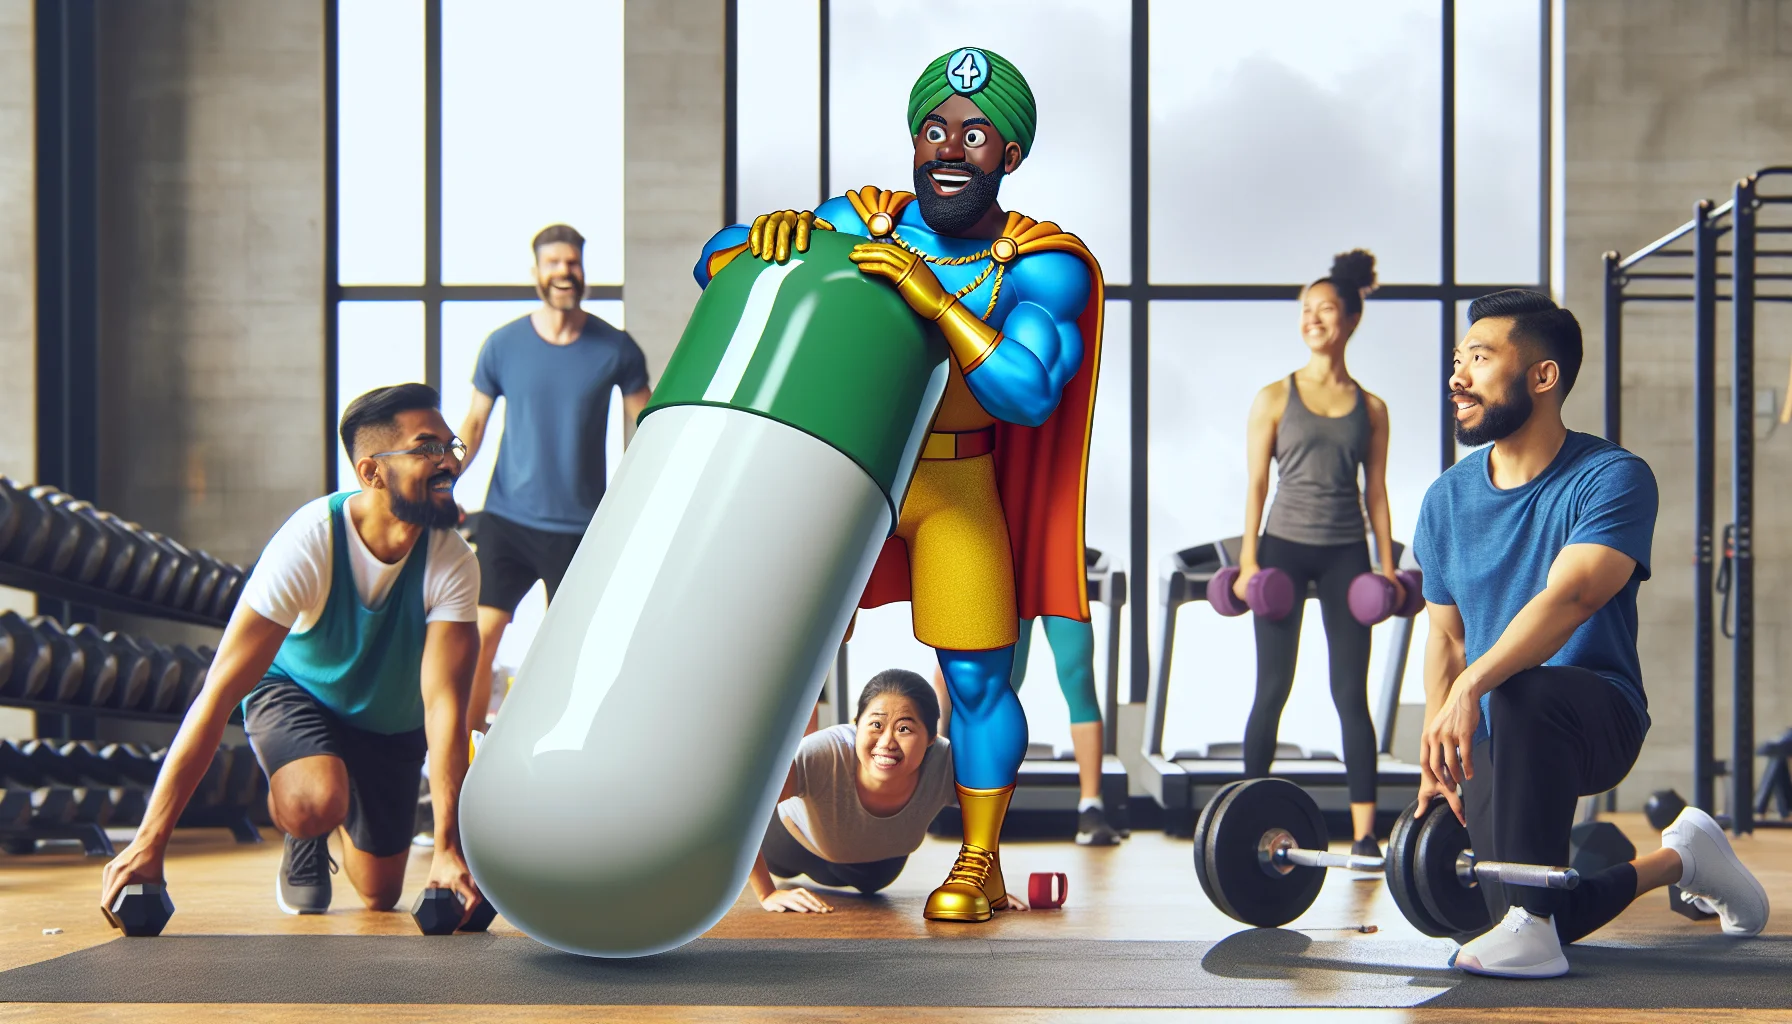 Create a humorous and realistic image capturing the importance of sports supplements. Visualize a scene where a humorous character, perhaps in a superhero costume, holds a large pill representing esomeprazole magnesium, a commonly used supplement. The character is in a gym, surrounded by energetic individuals of various descents and genders--a Middle-Eastern man doing push-ups, a South Asian woman lifting weights, and a Black man on a treadmill. The superhero character is showcasing the pill like a trophy, setting a jovial atmosphere while subtly promoting its use for sports performance.